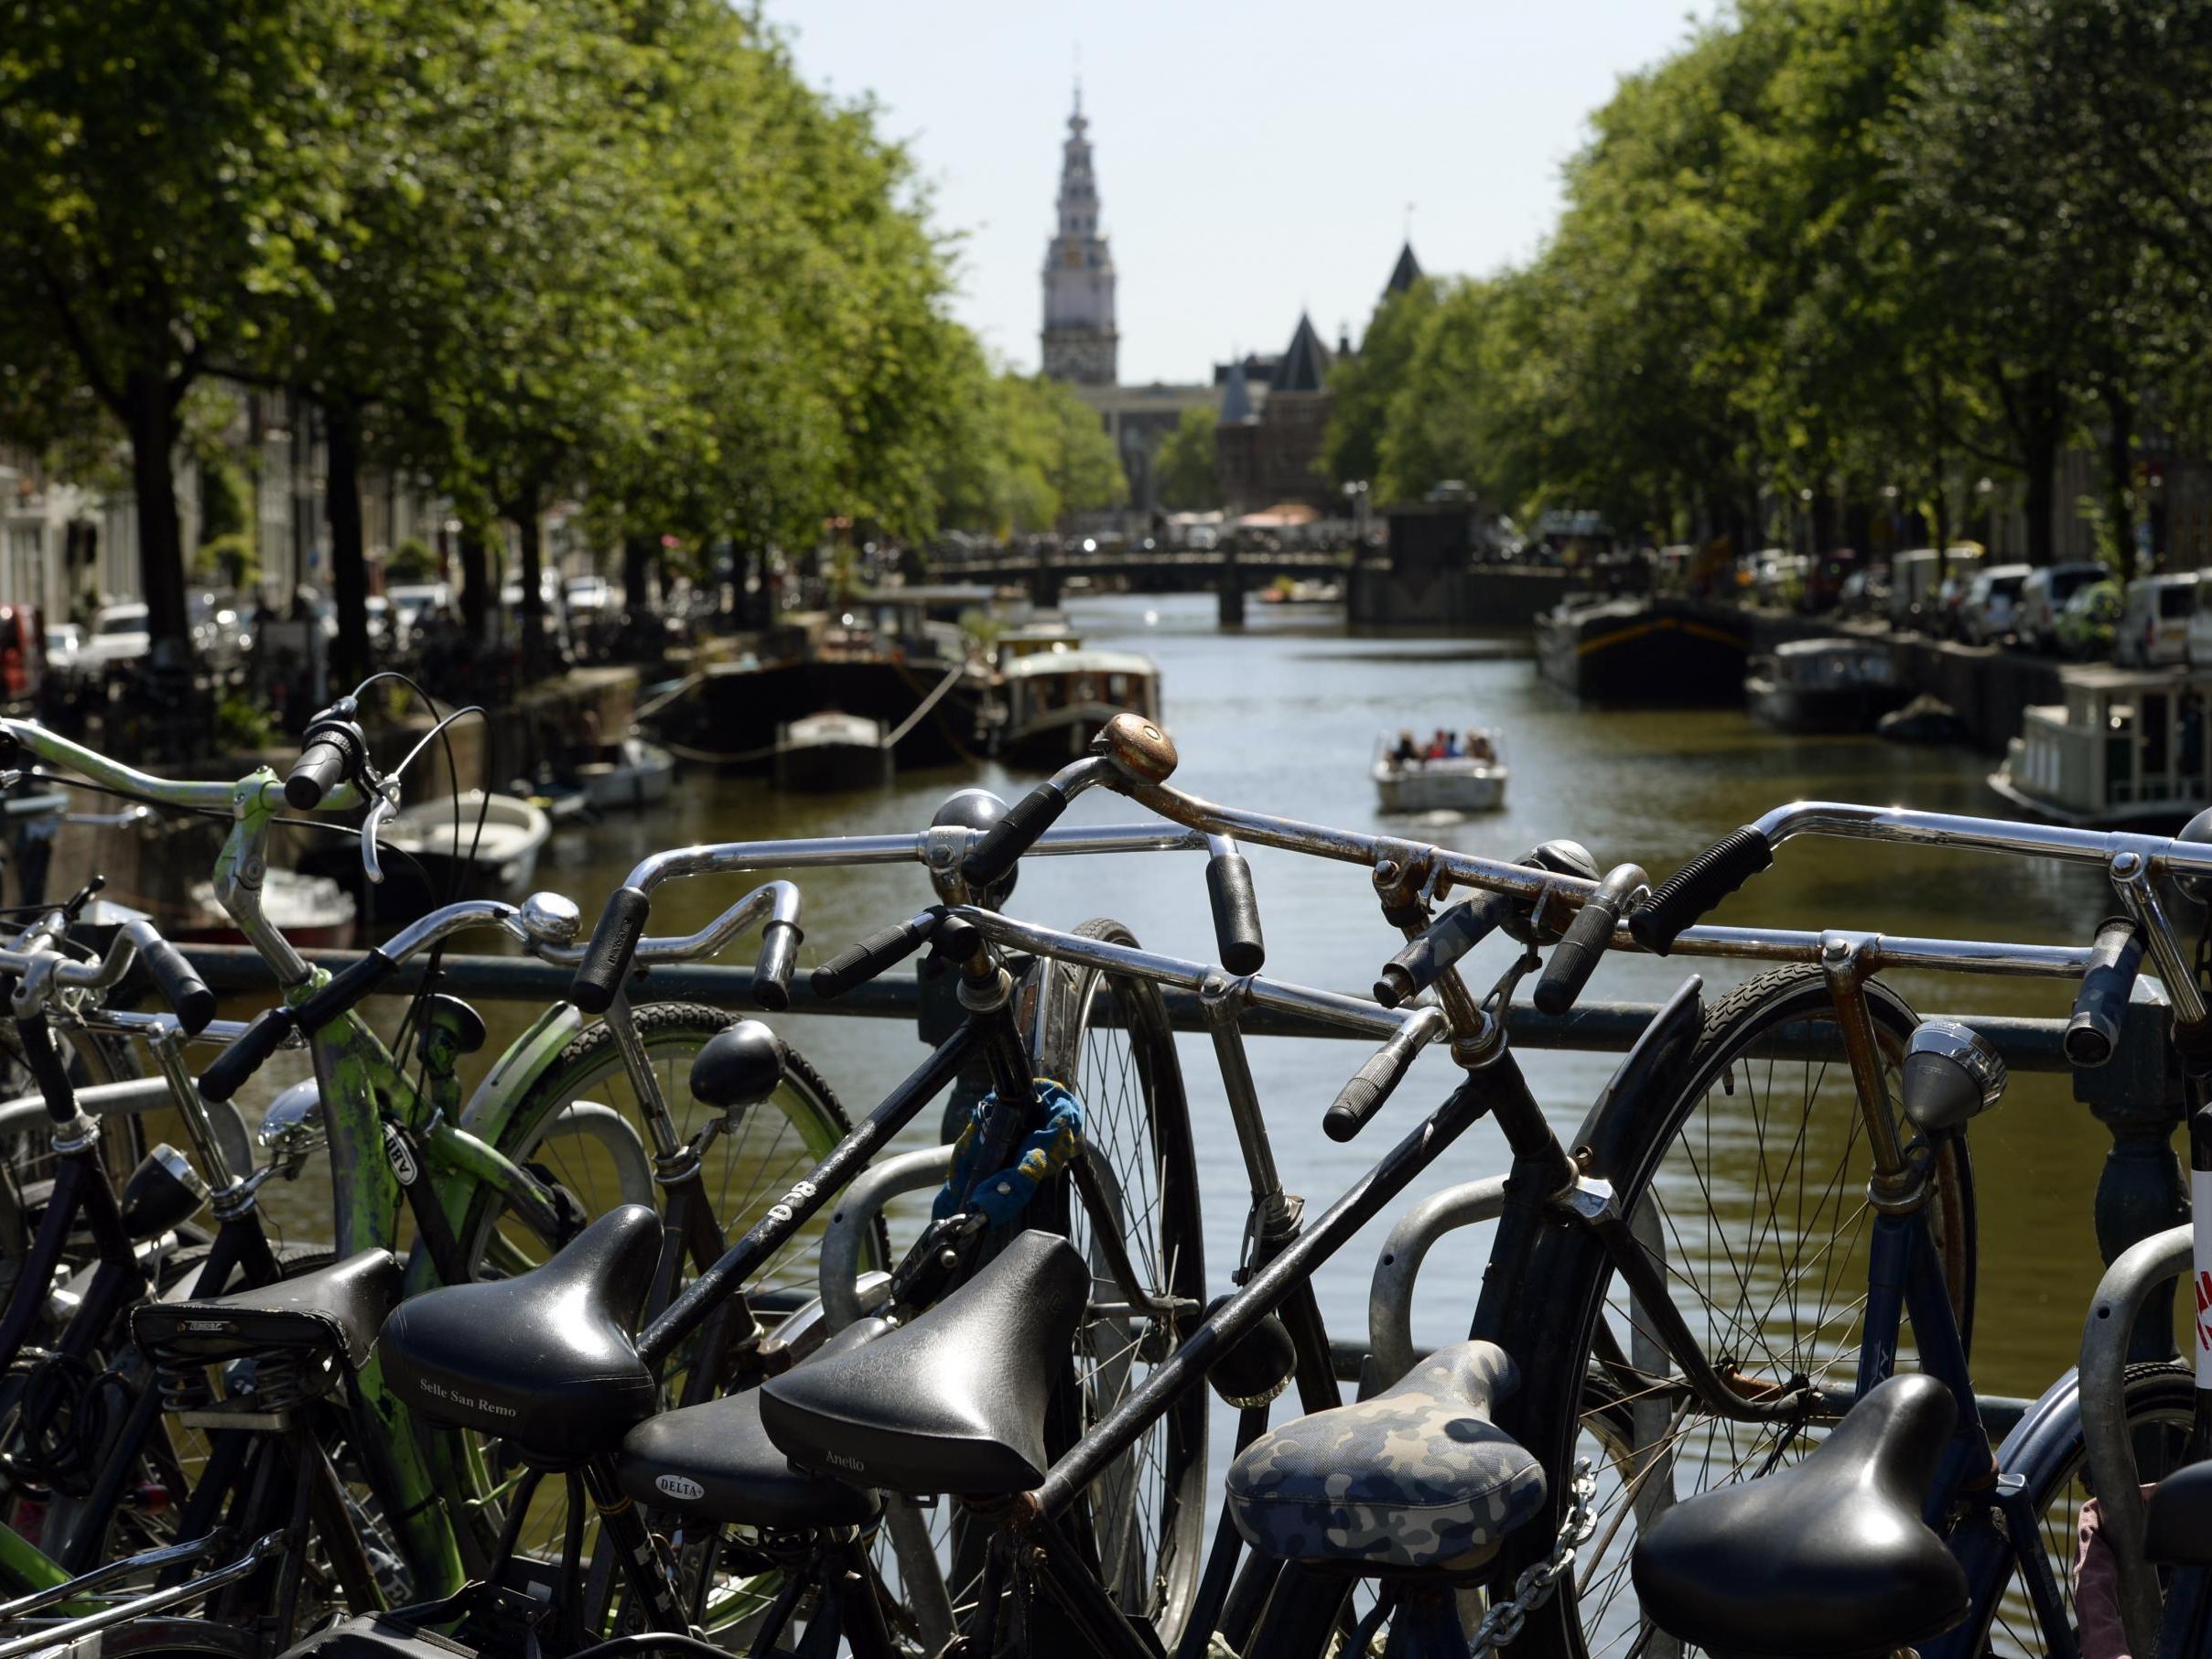 Although bicycles are popular among the Dutch, air pollution in the Netherlands is worse than European rules permit